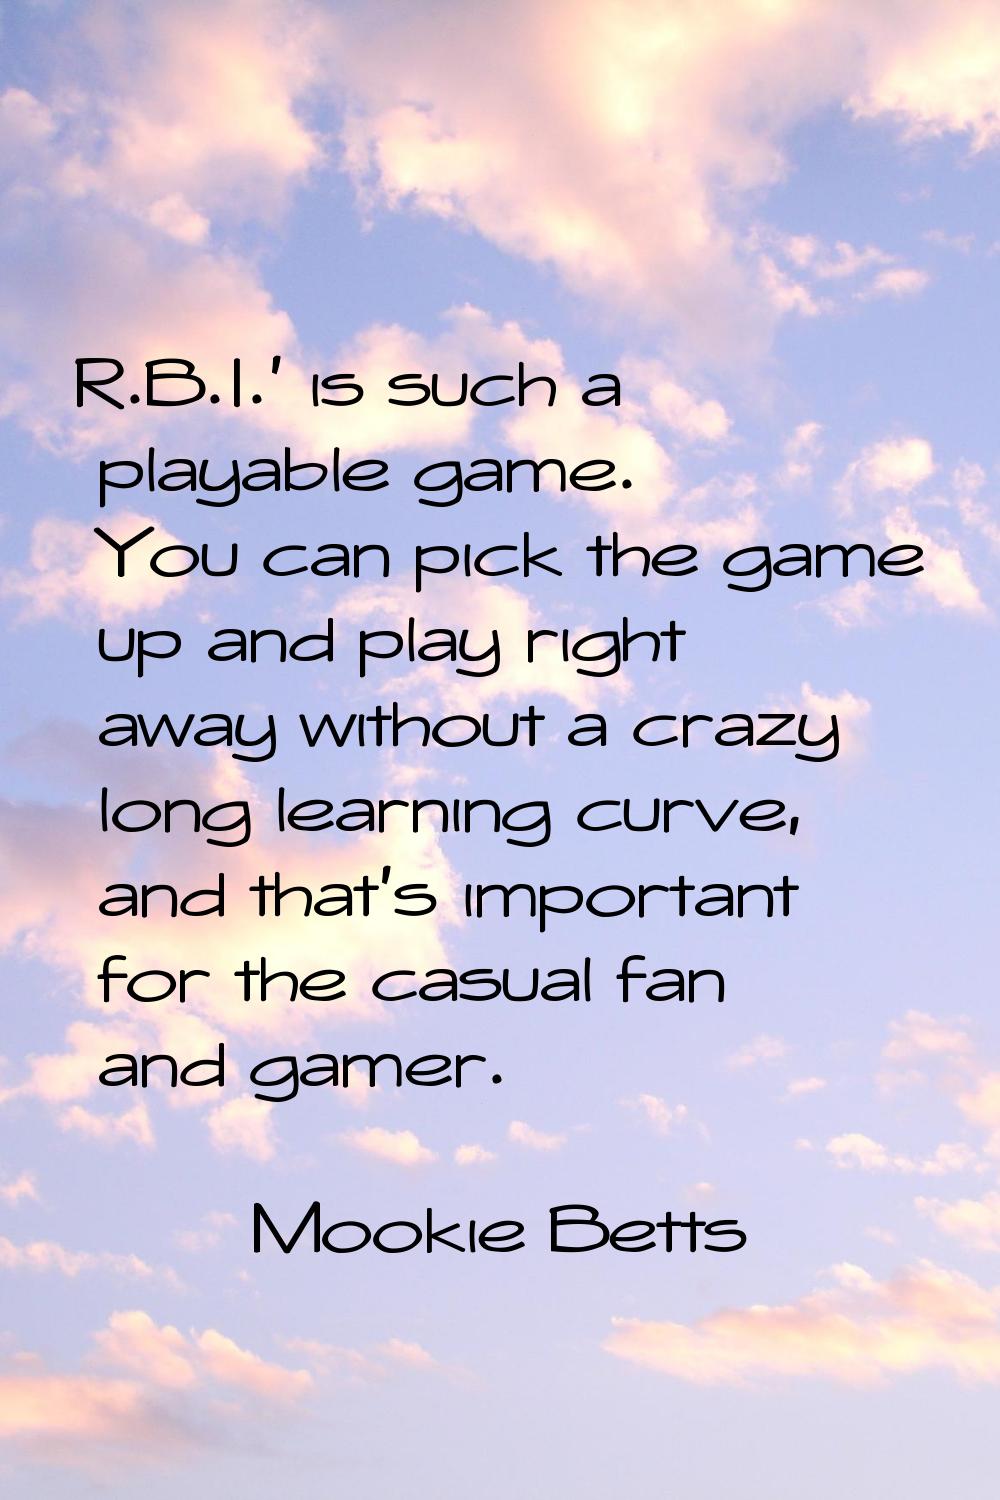 R.B.I.' is such a playable game. You can pick the game up and play right away without a crazy long 